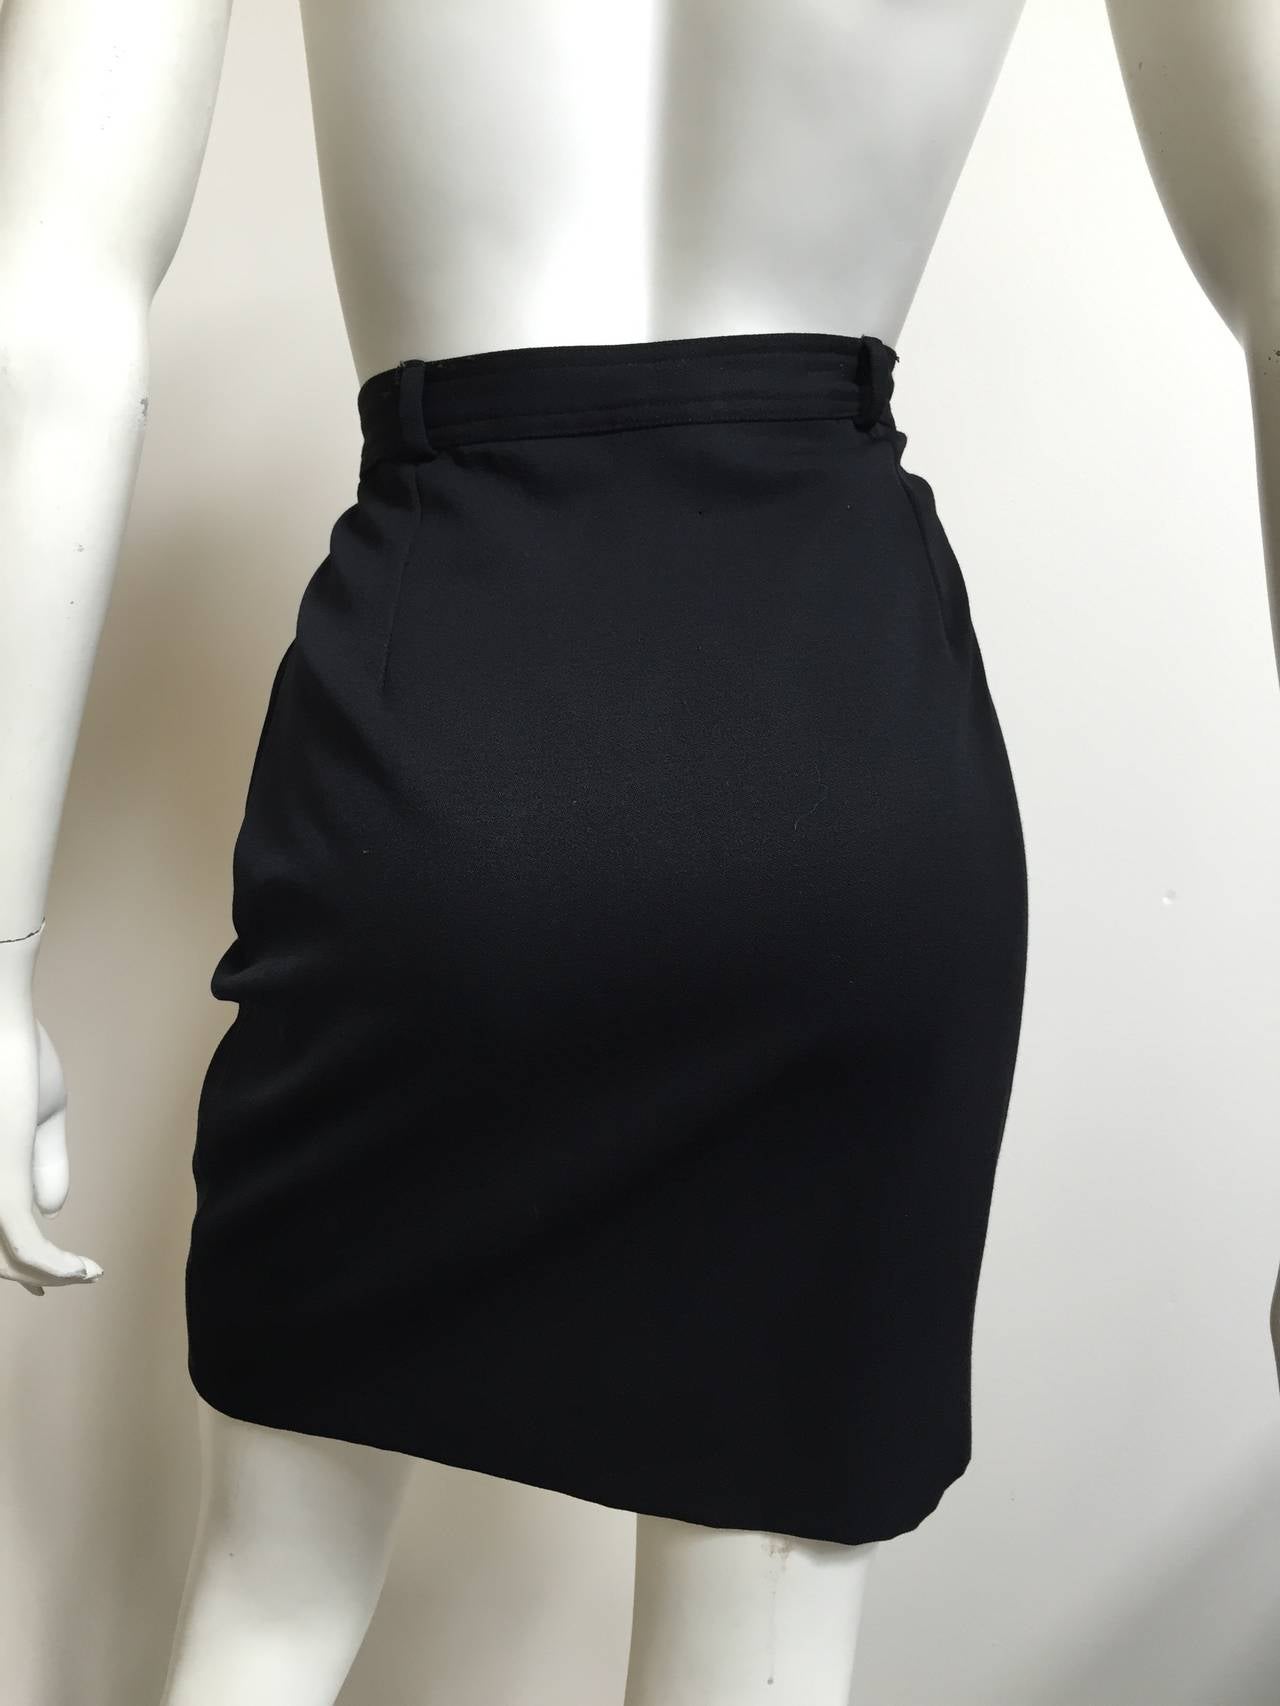 Valentino 80s Black Wool Skirt With Pockets Size 6. 2